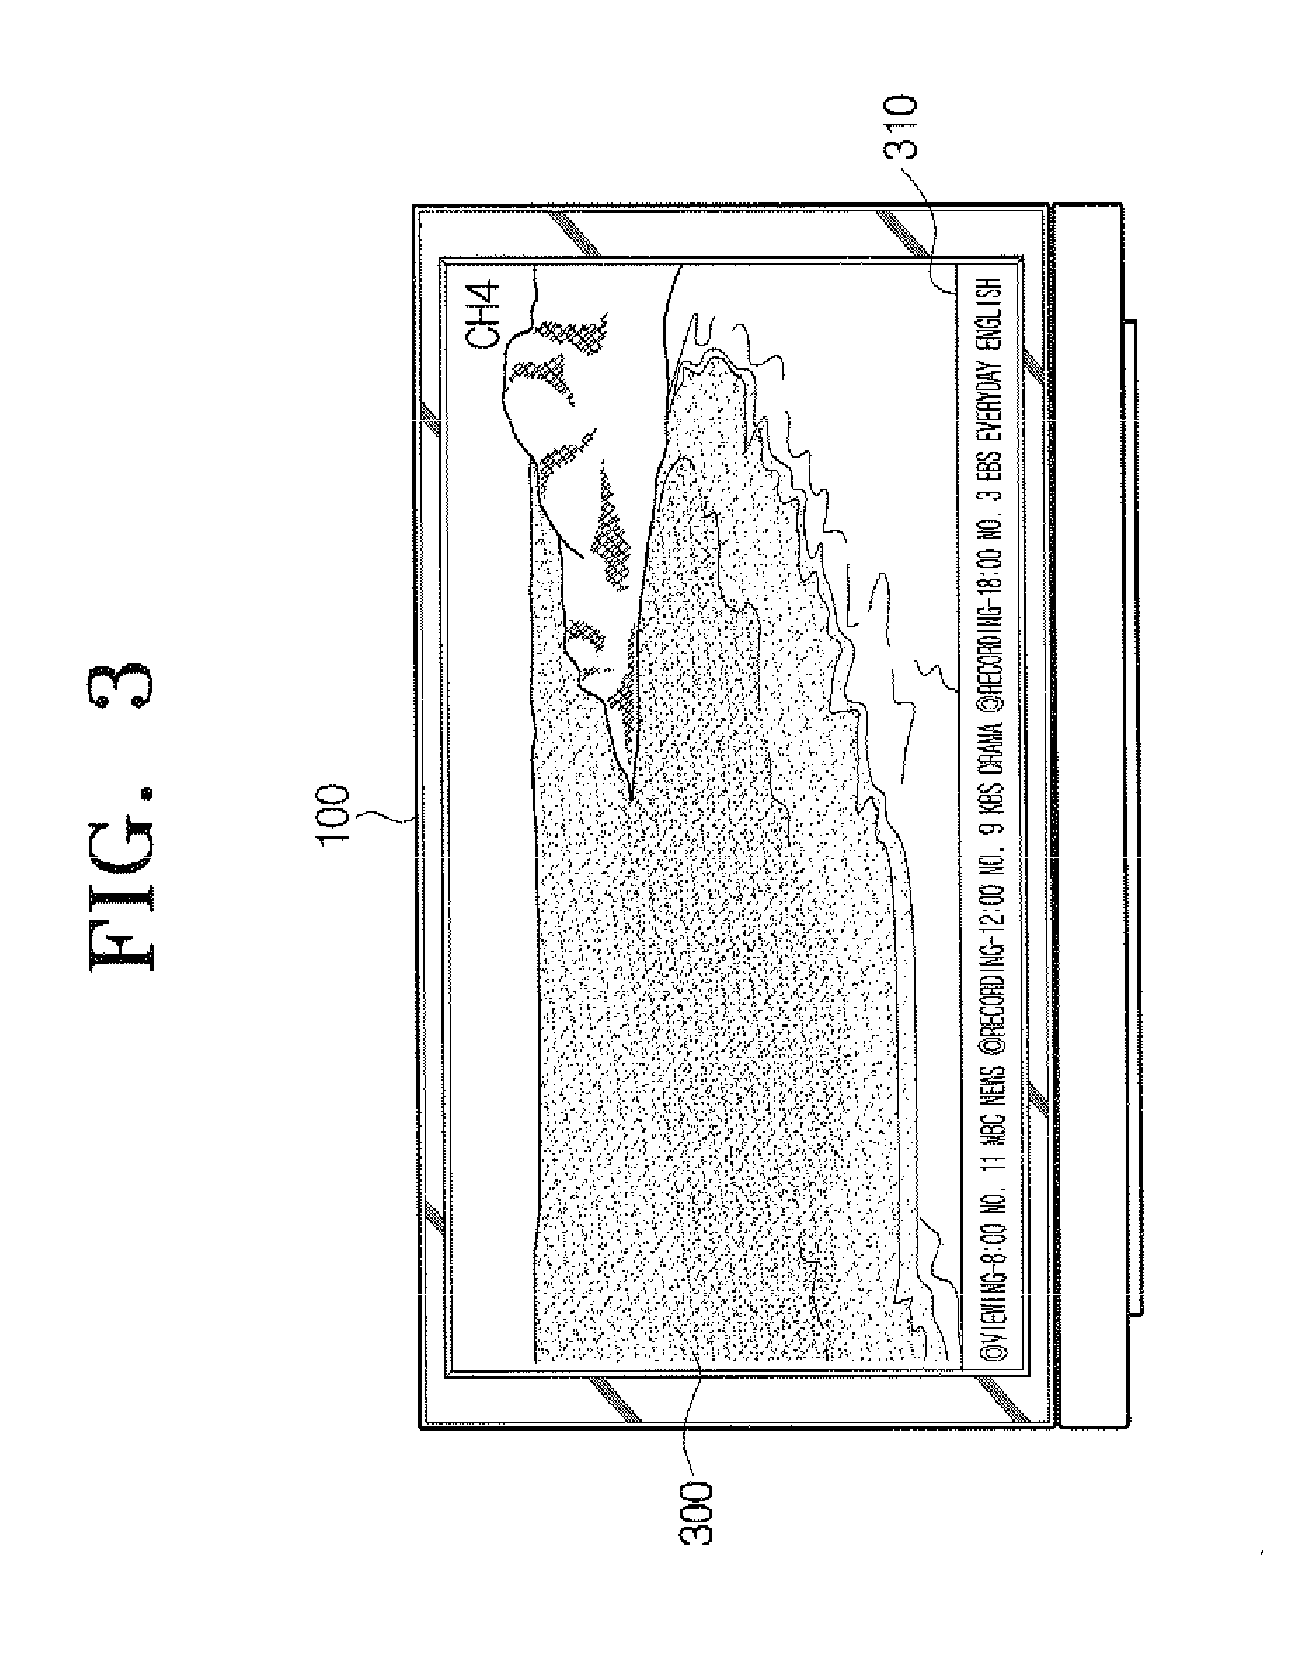 Image display apparatus and method for displaying broadcast schedule list